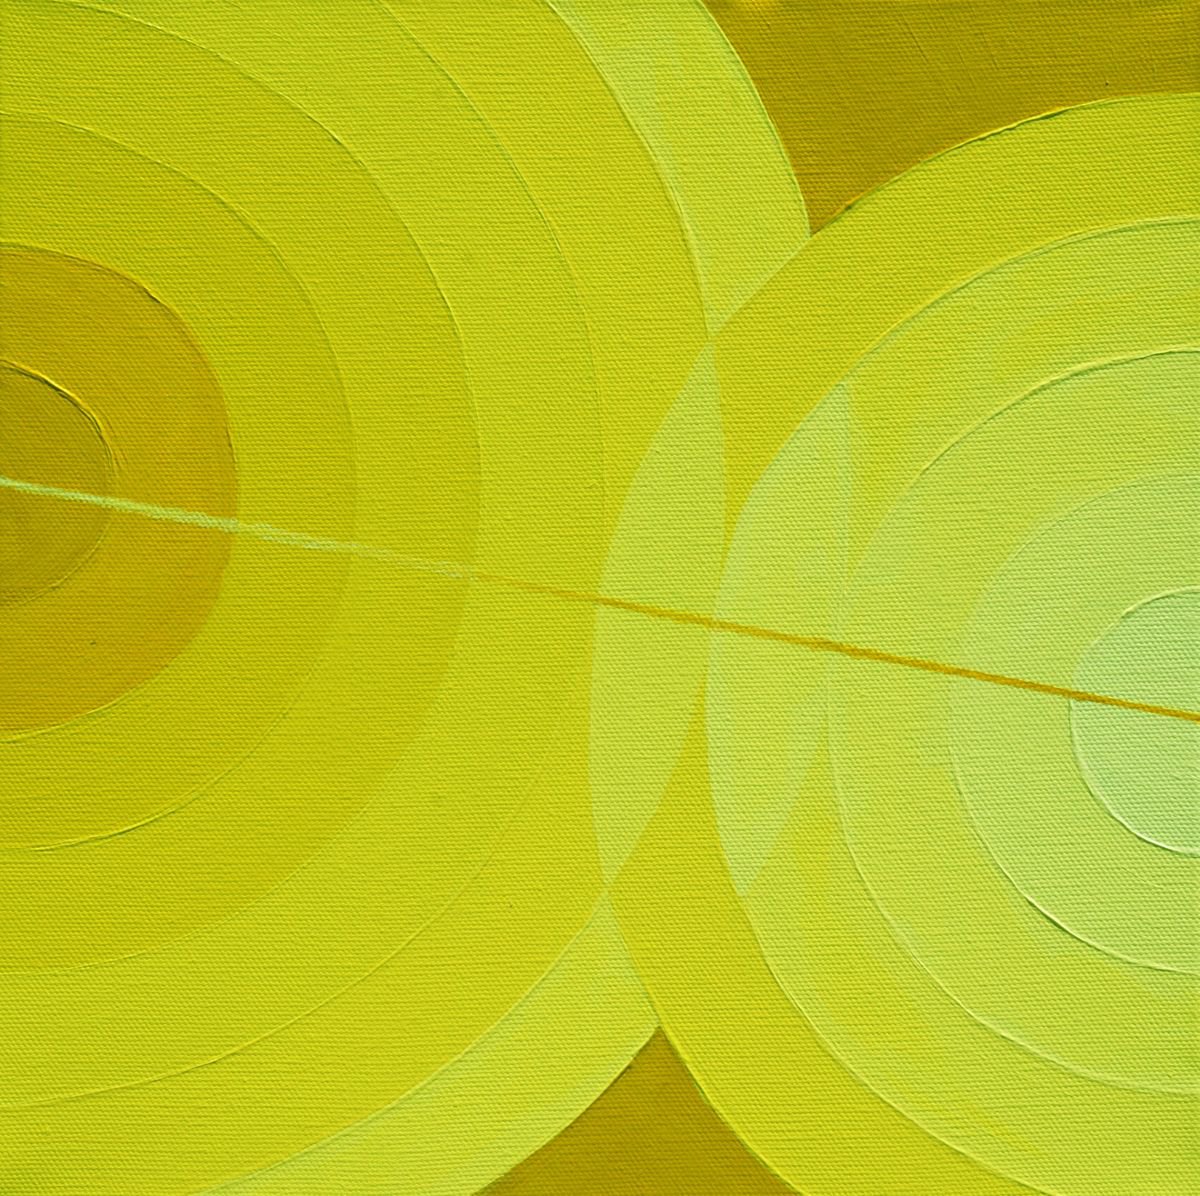 Geometric 007 (7+5 circles, 3 centimetres, 10 degrees) by Stephen Beer